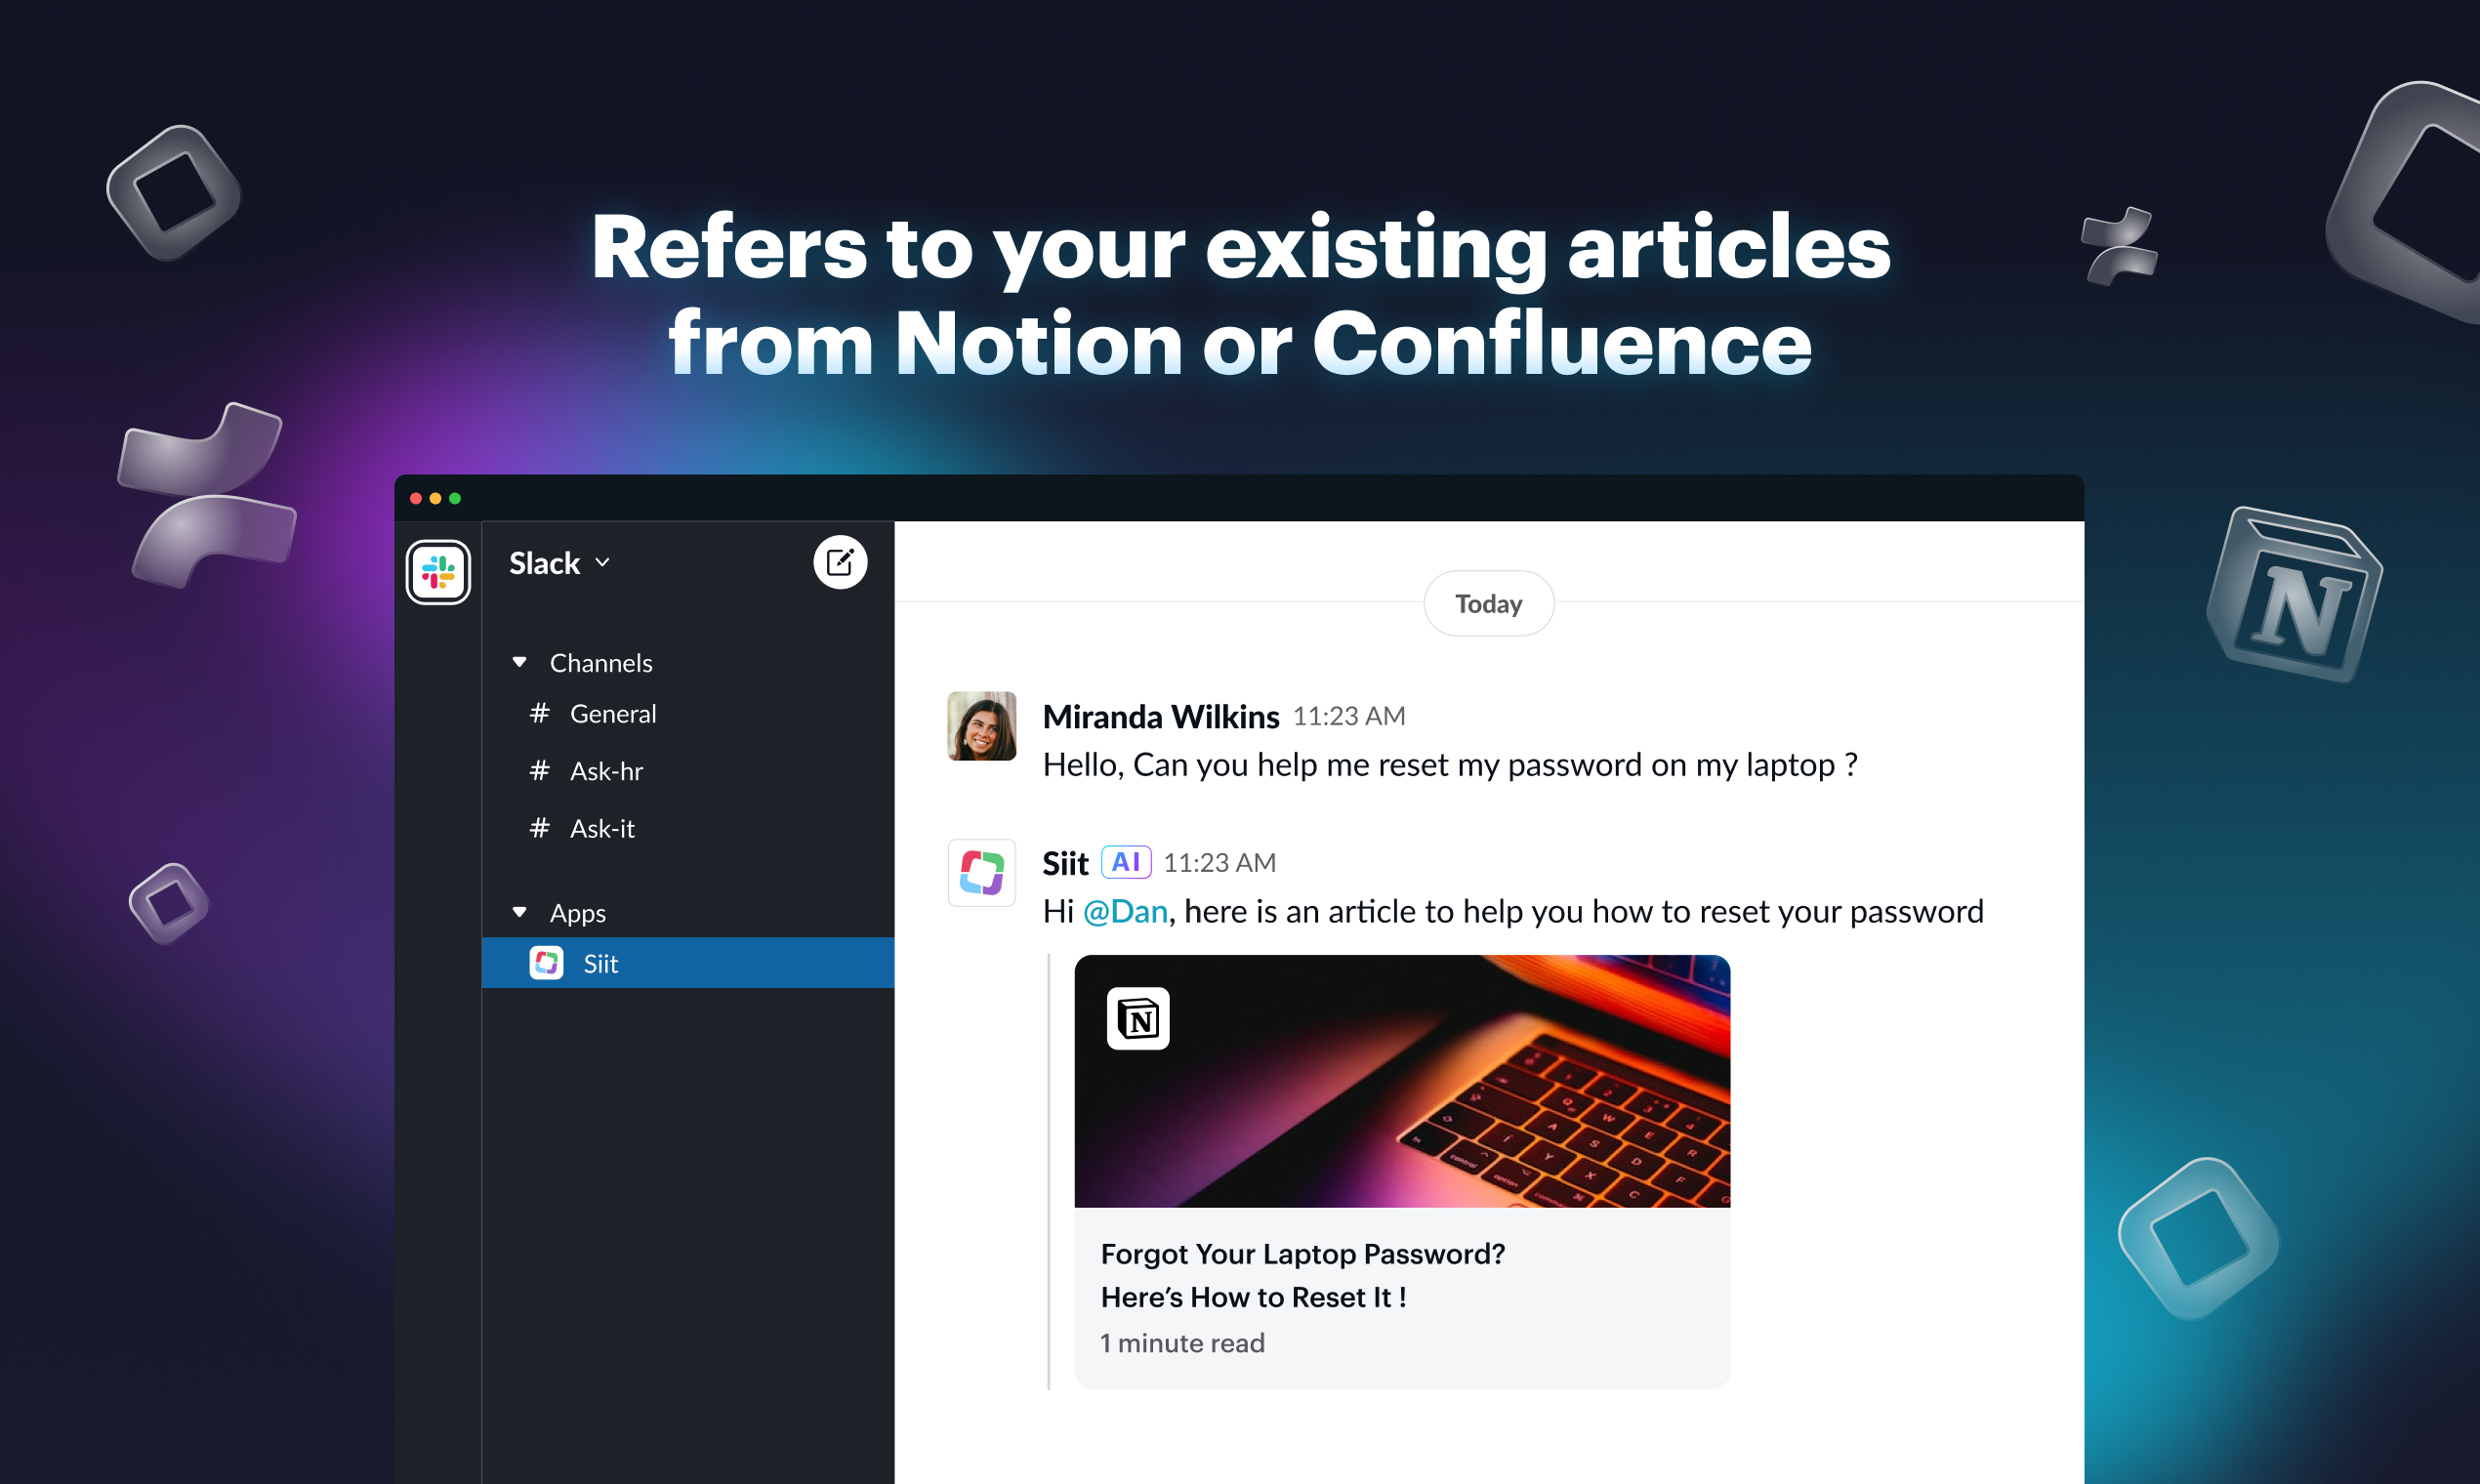 Refers to your existing articles from Notion or Confluence